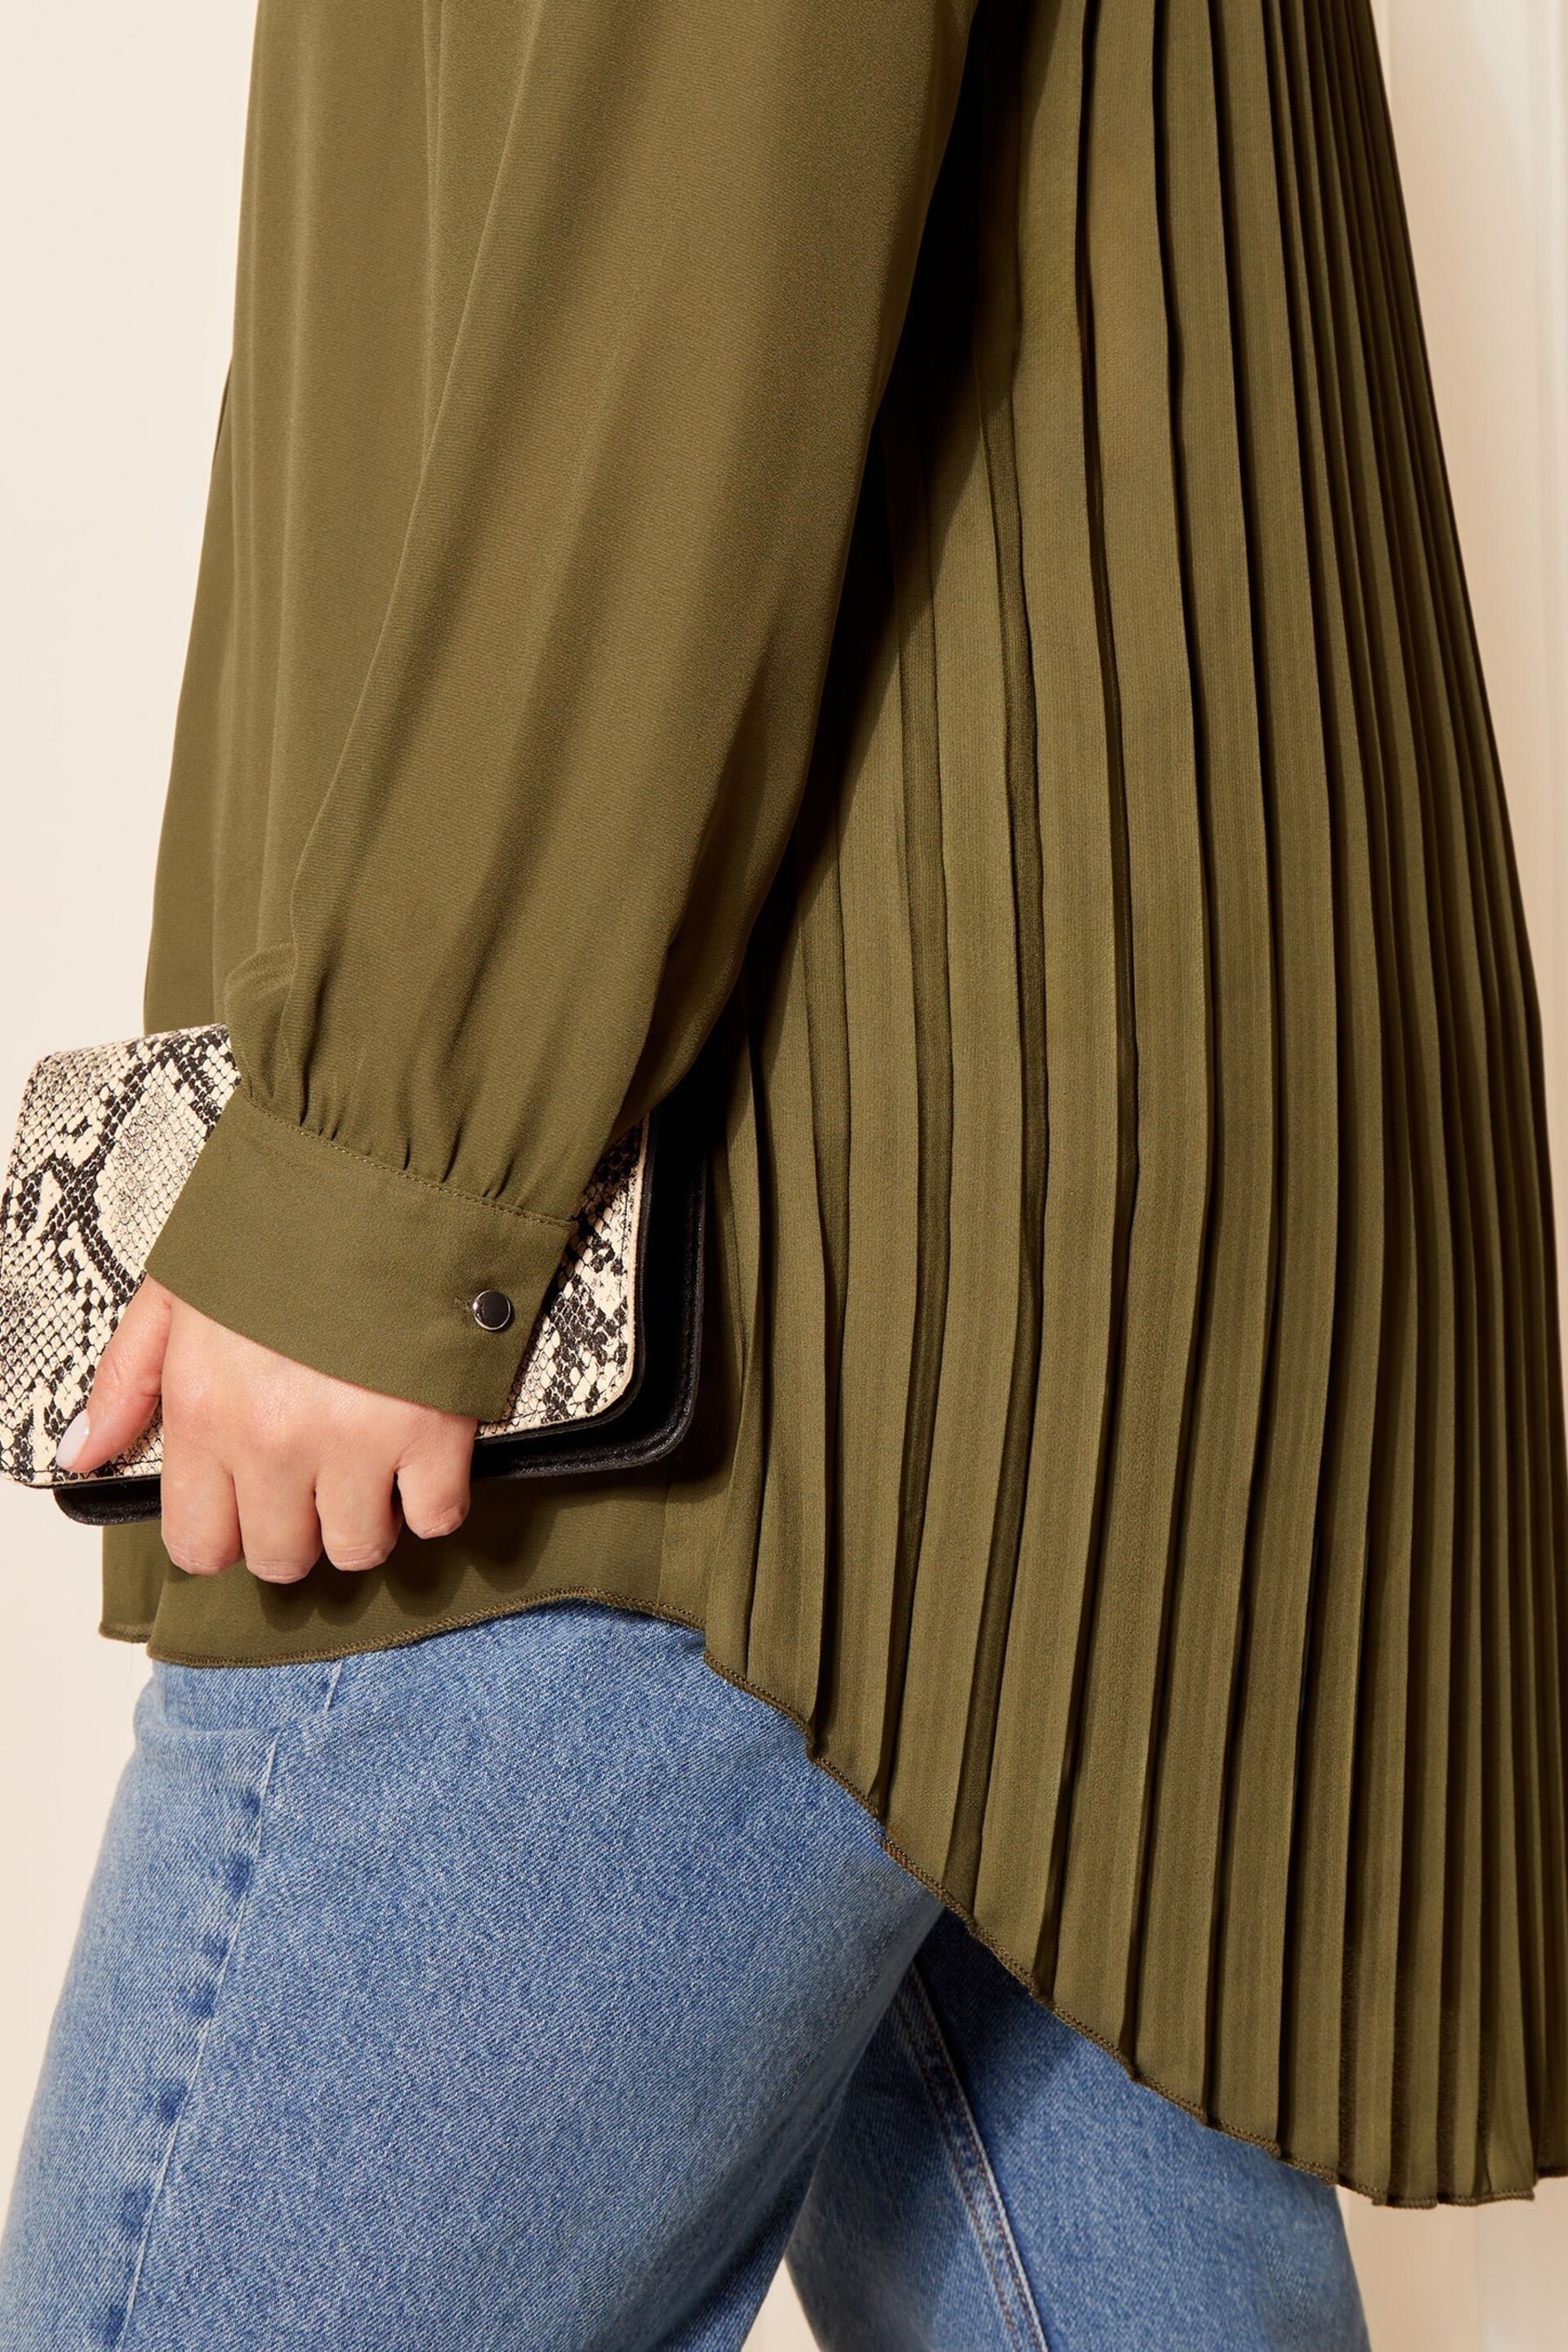 Curves Like These Khaki Green Pleated Back Button Through Shirt - Image 4 of 4